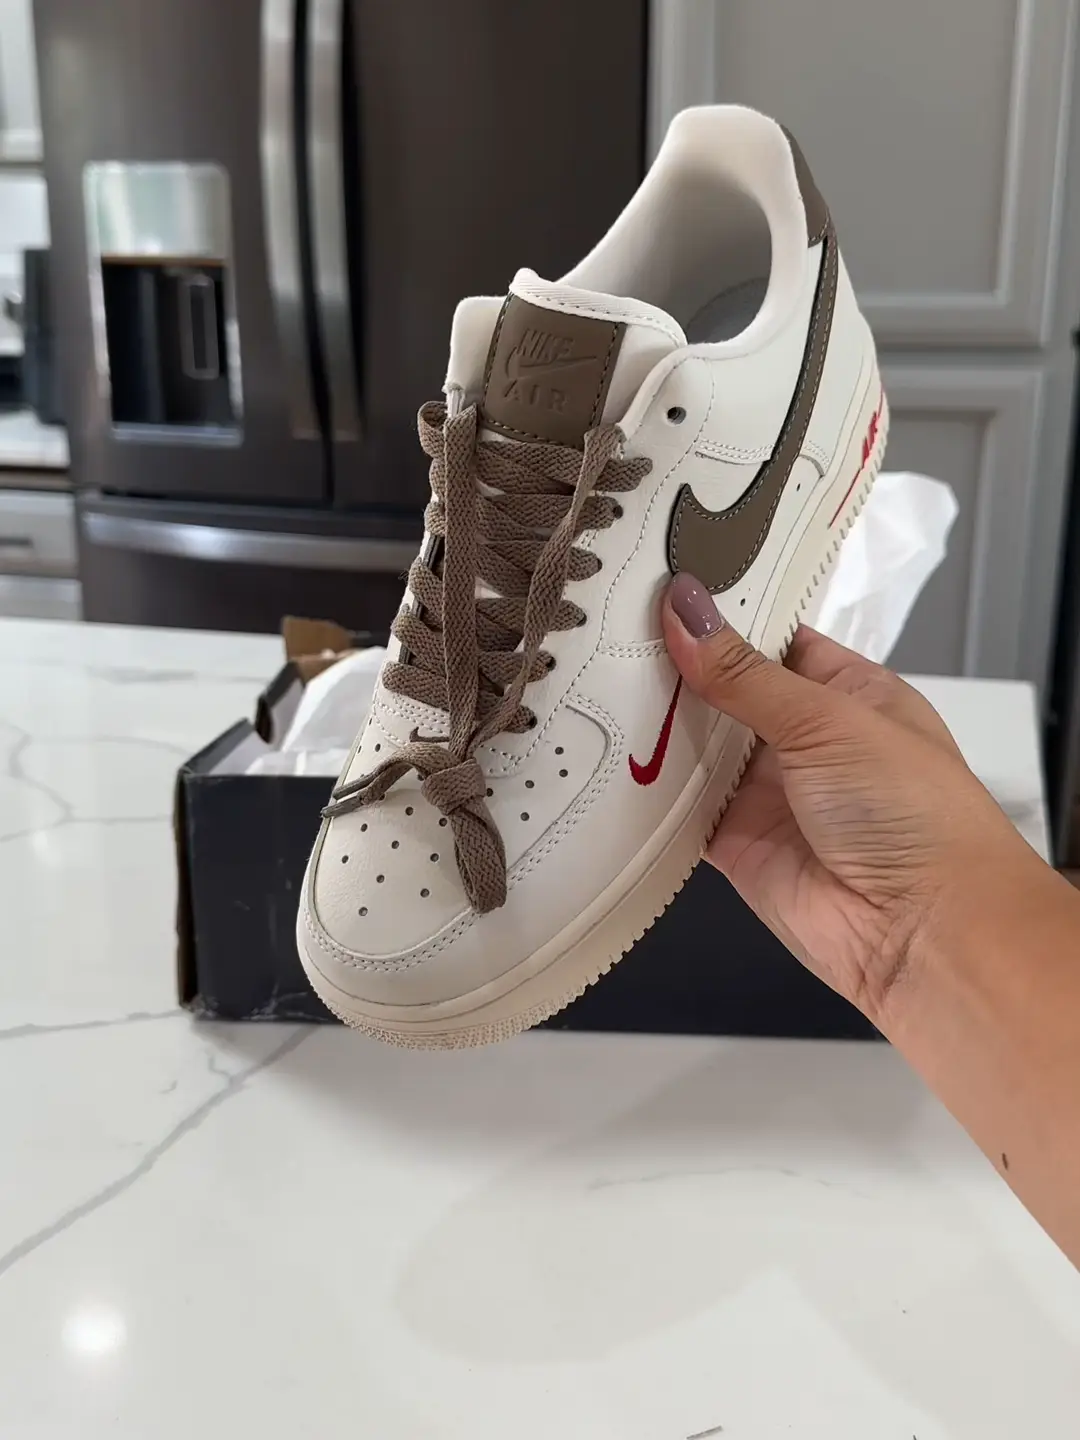 dhgate is actually so good. link in my bio for these exact shoes